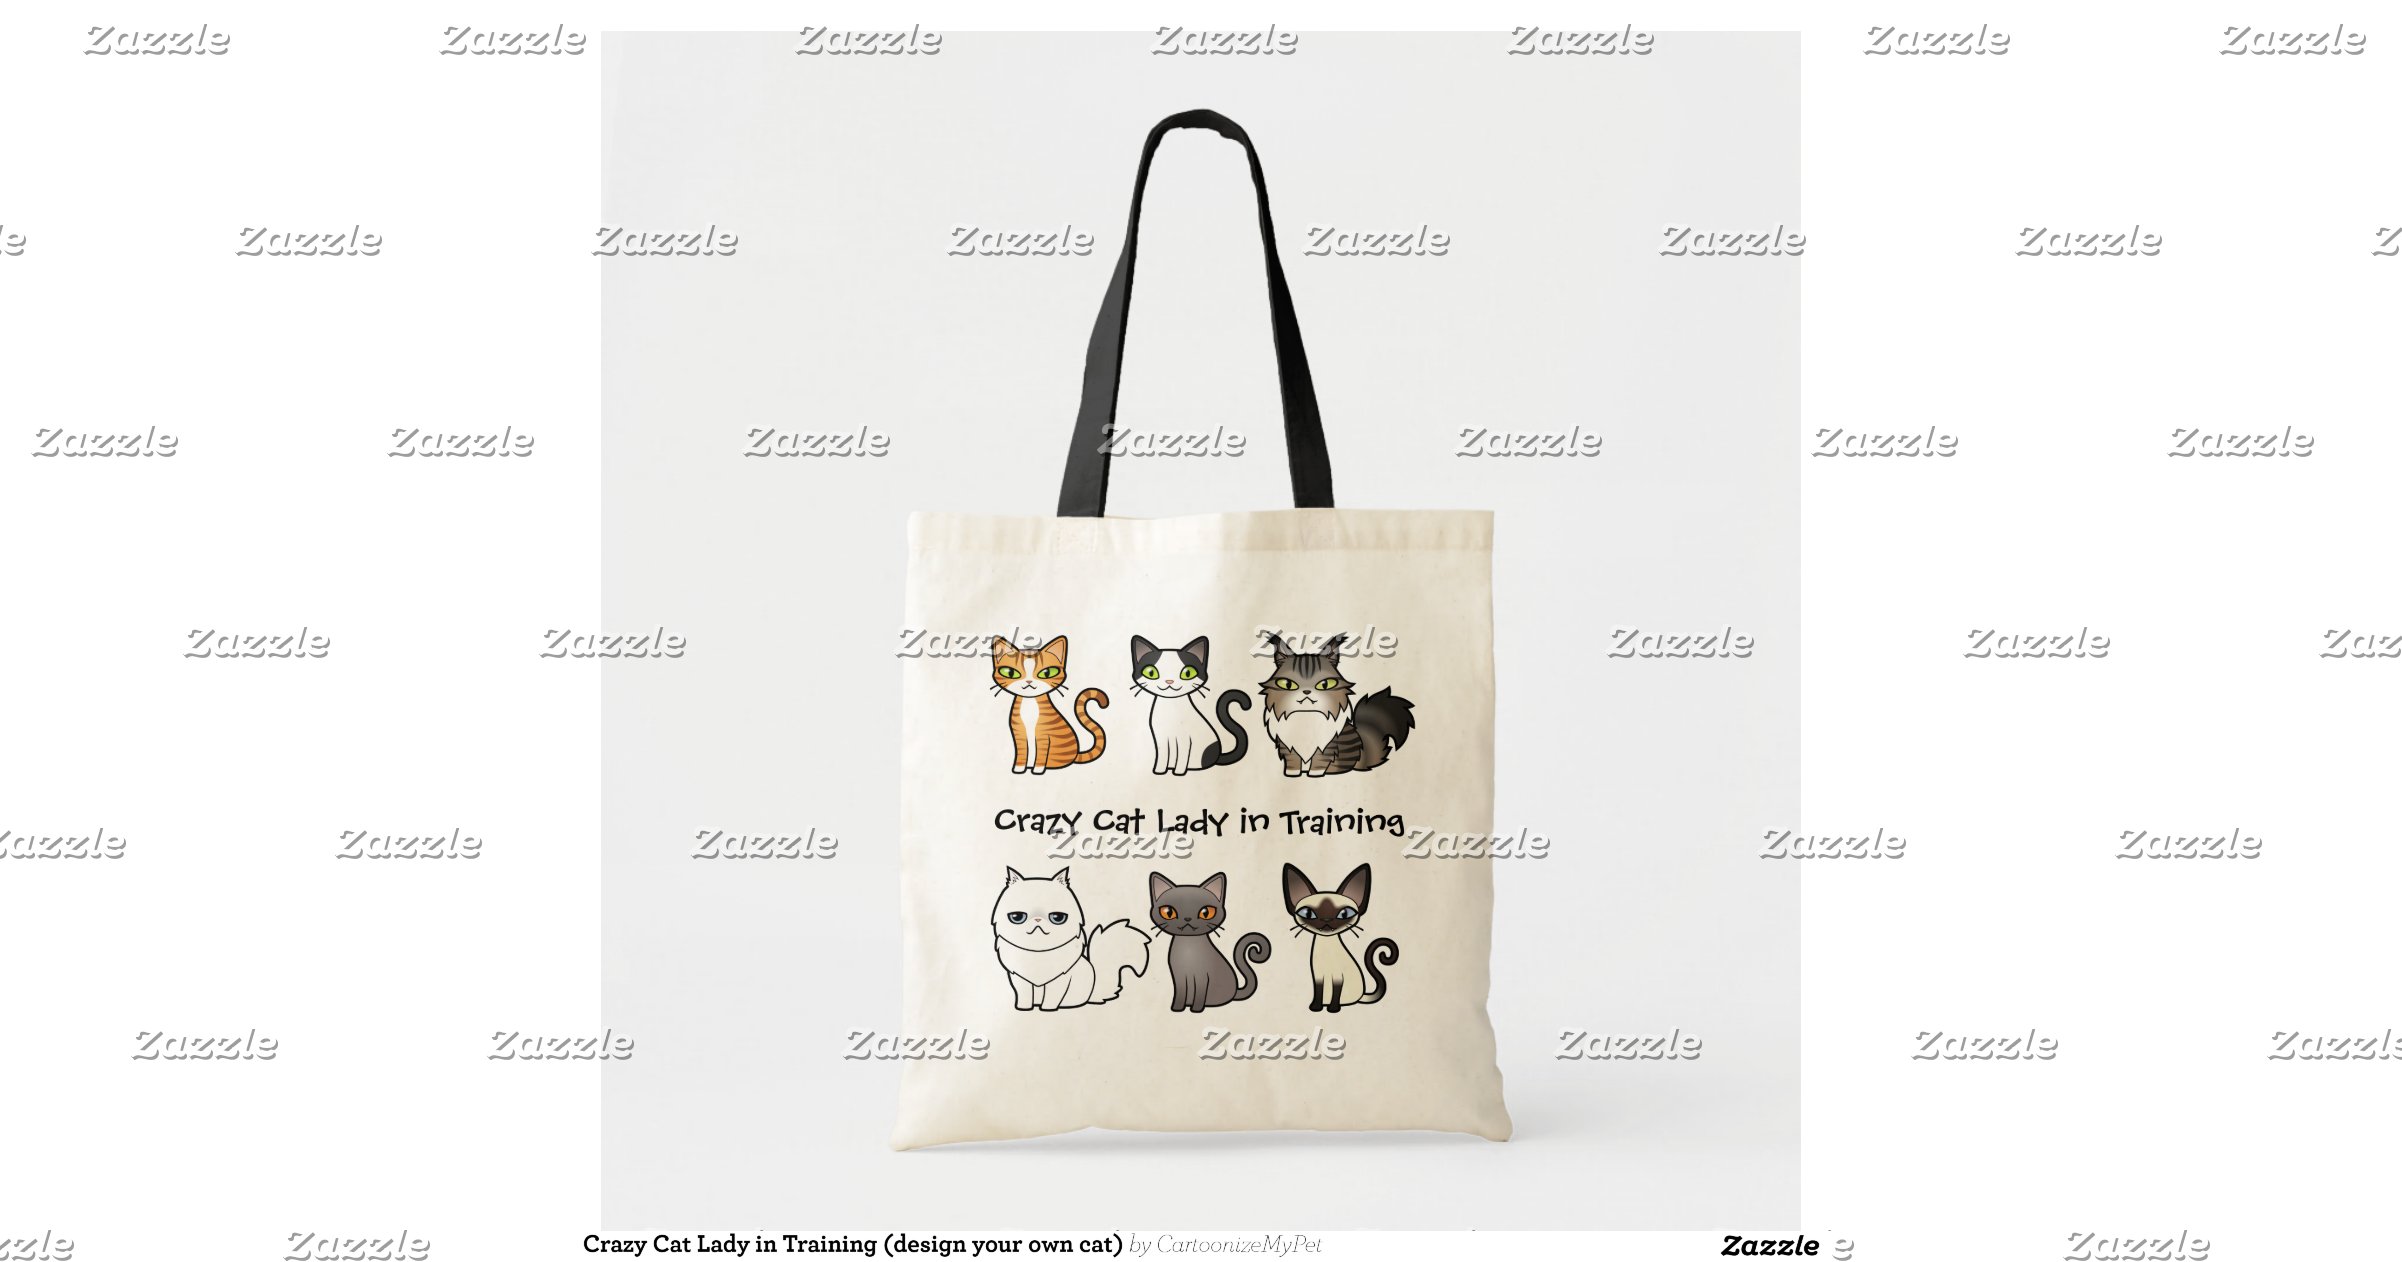 ... Cat Lady in Training (design your own cat) Budget Tote Bag | Zazzle